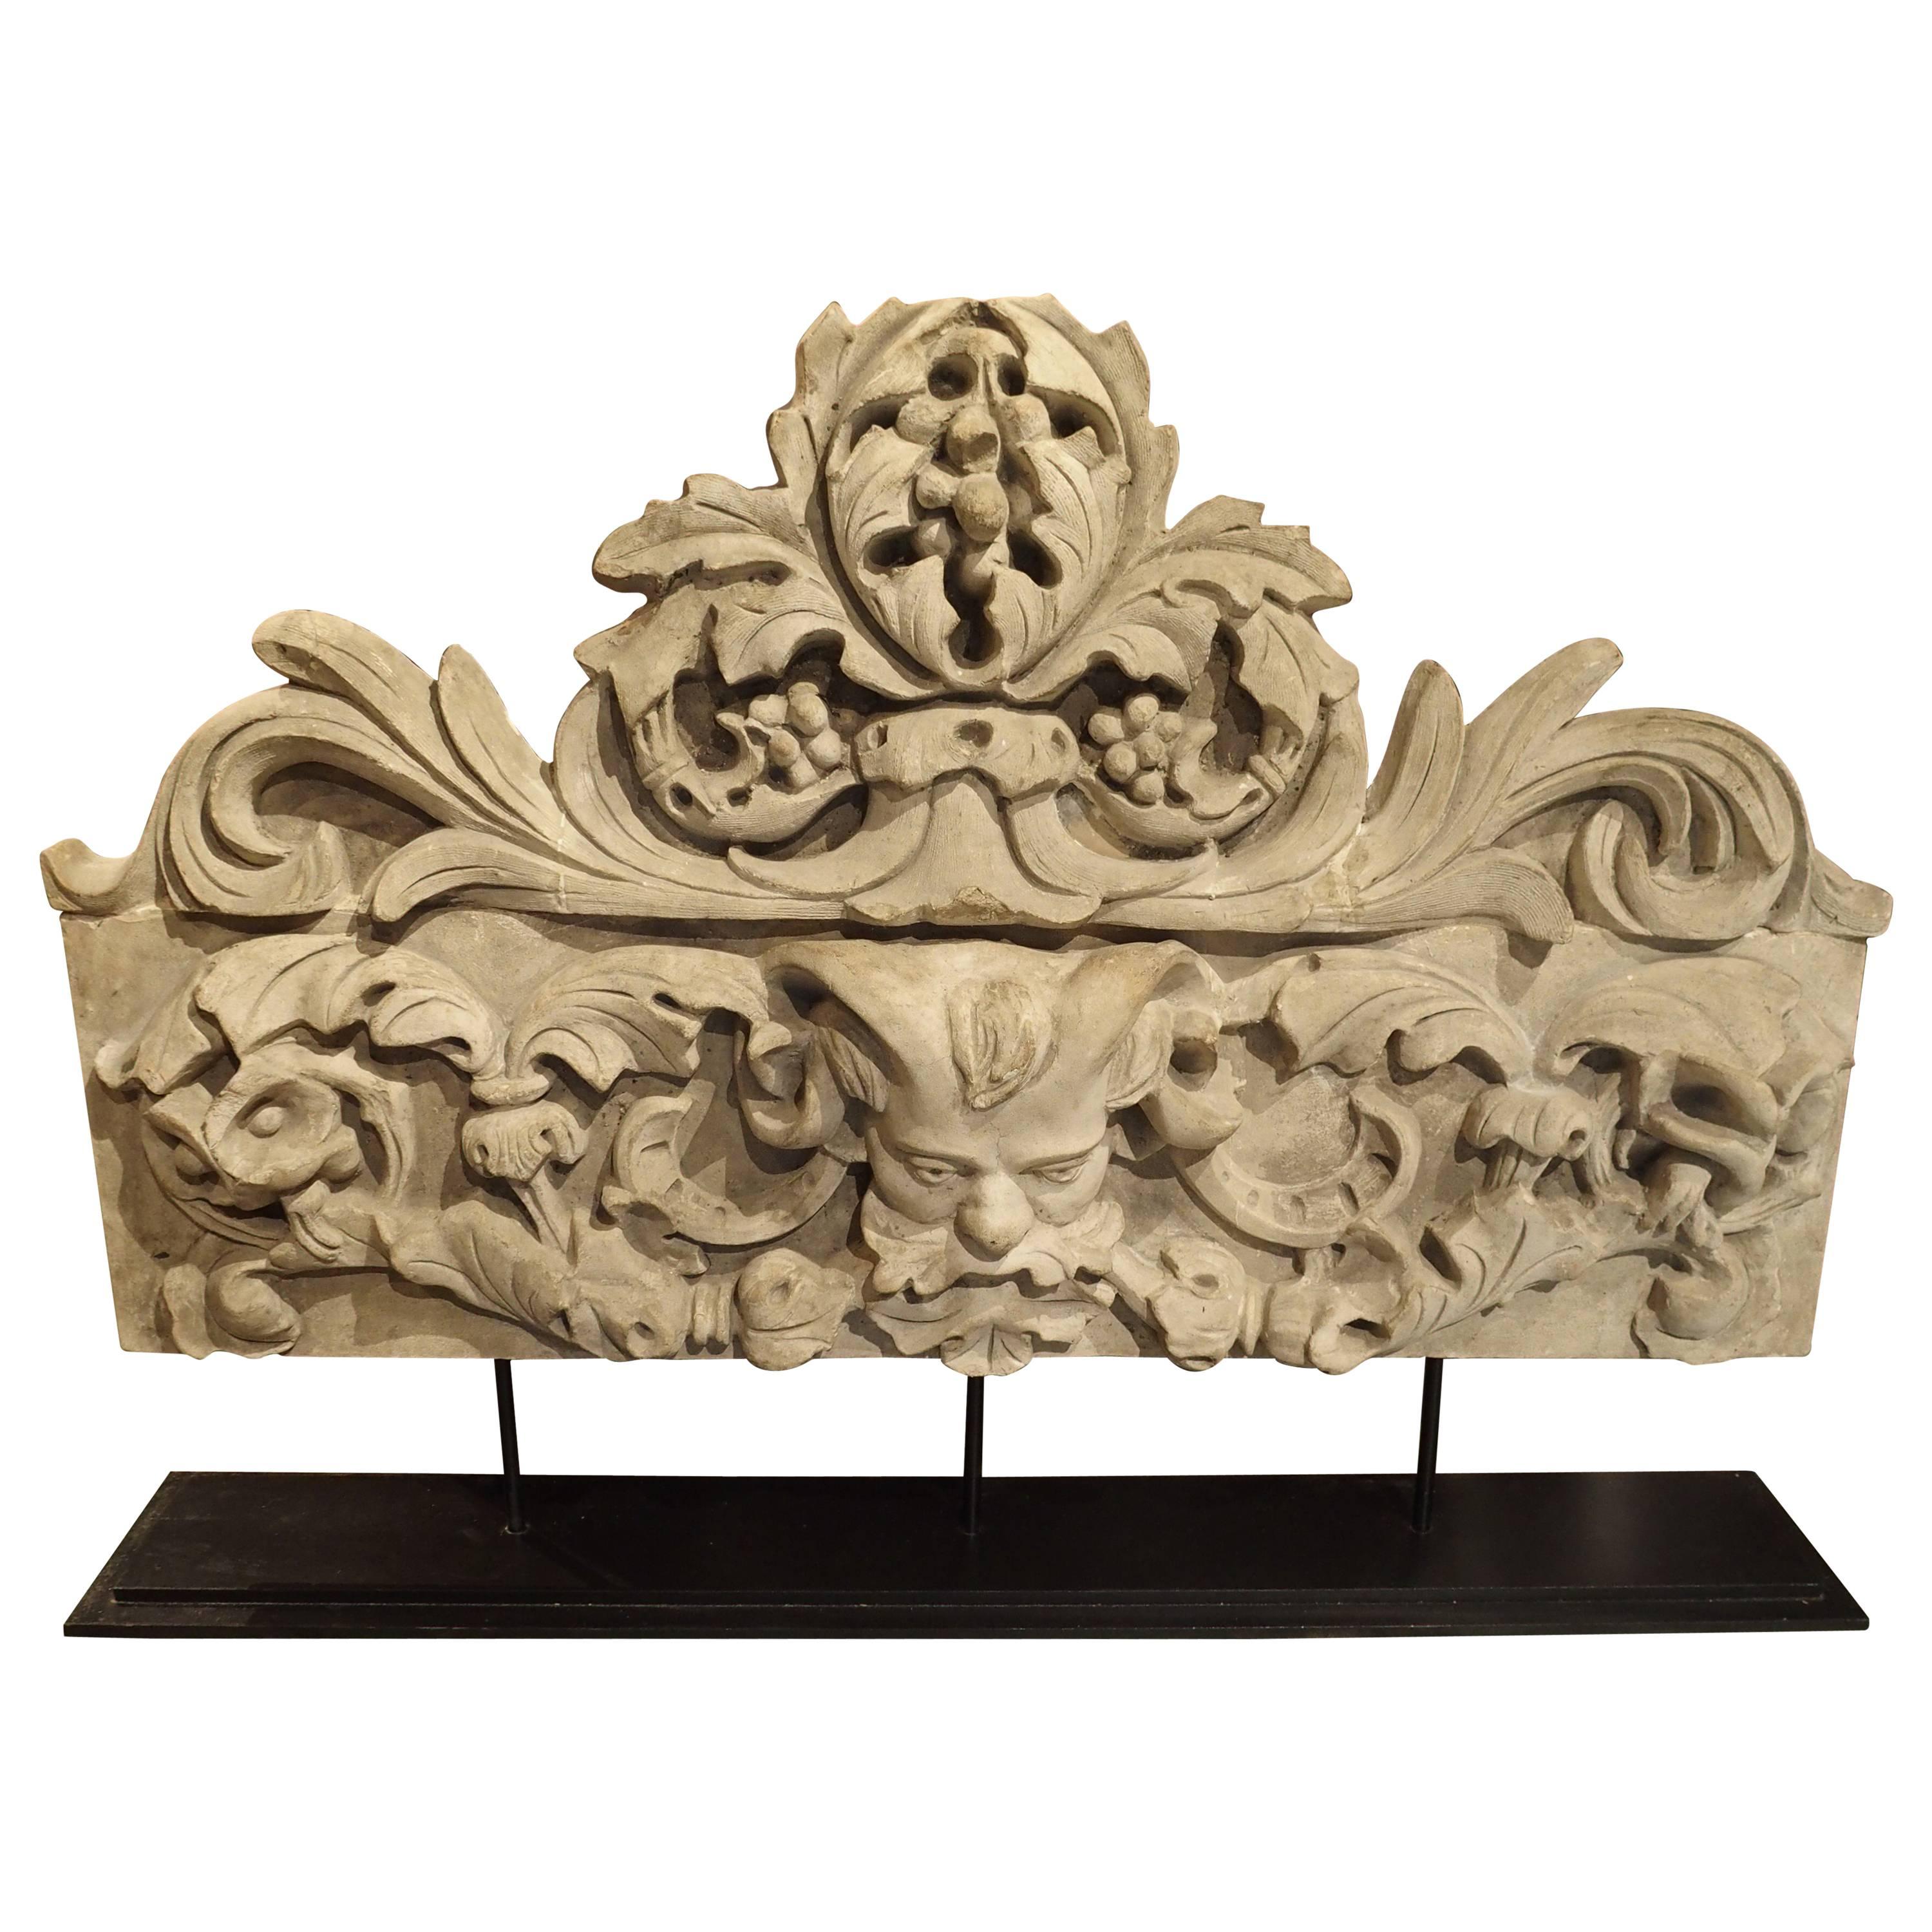 Patinated Terra Cotta Architectural Piece on Stand, France, circa 1900